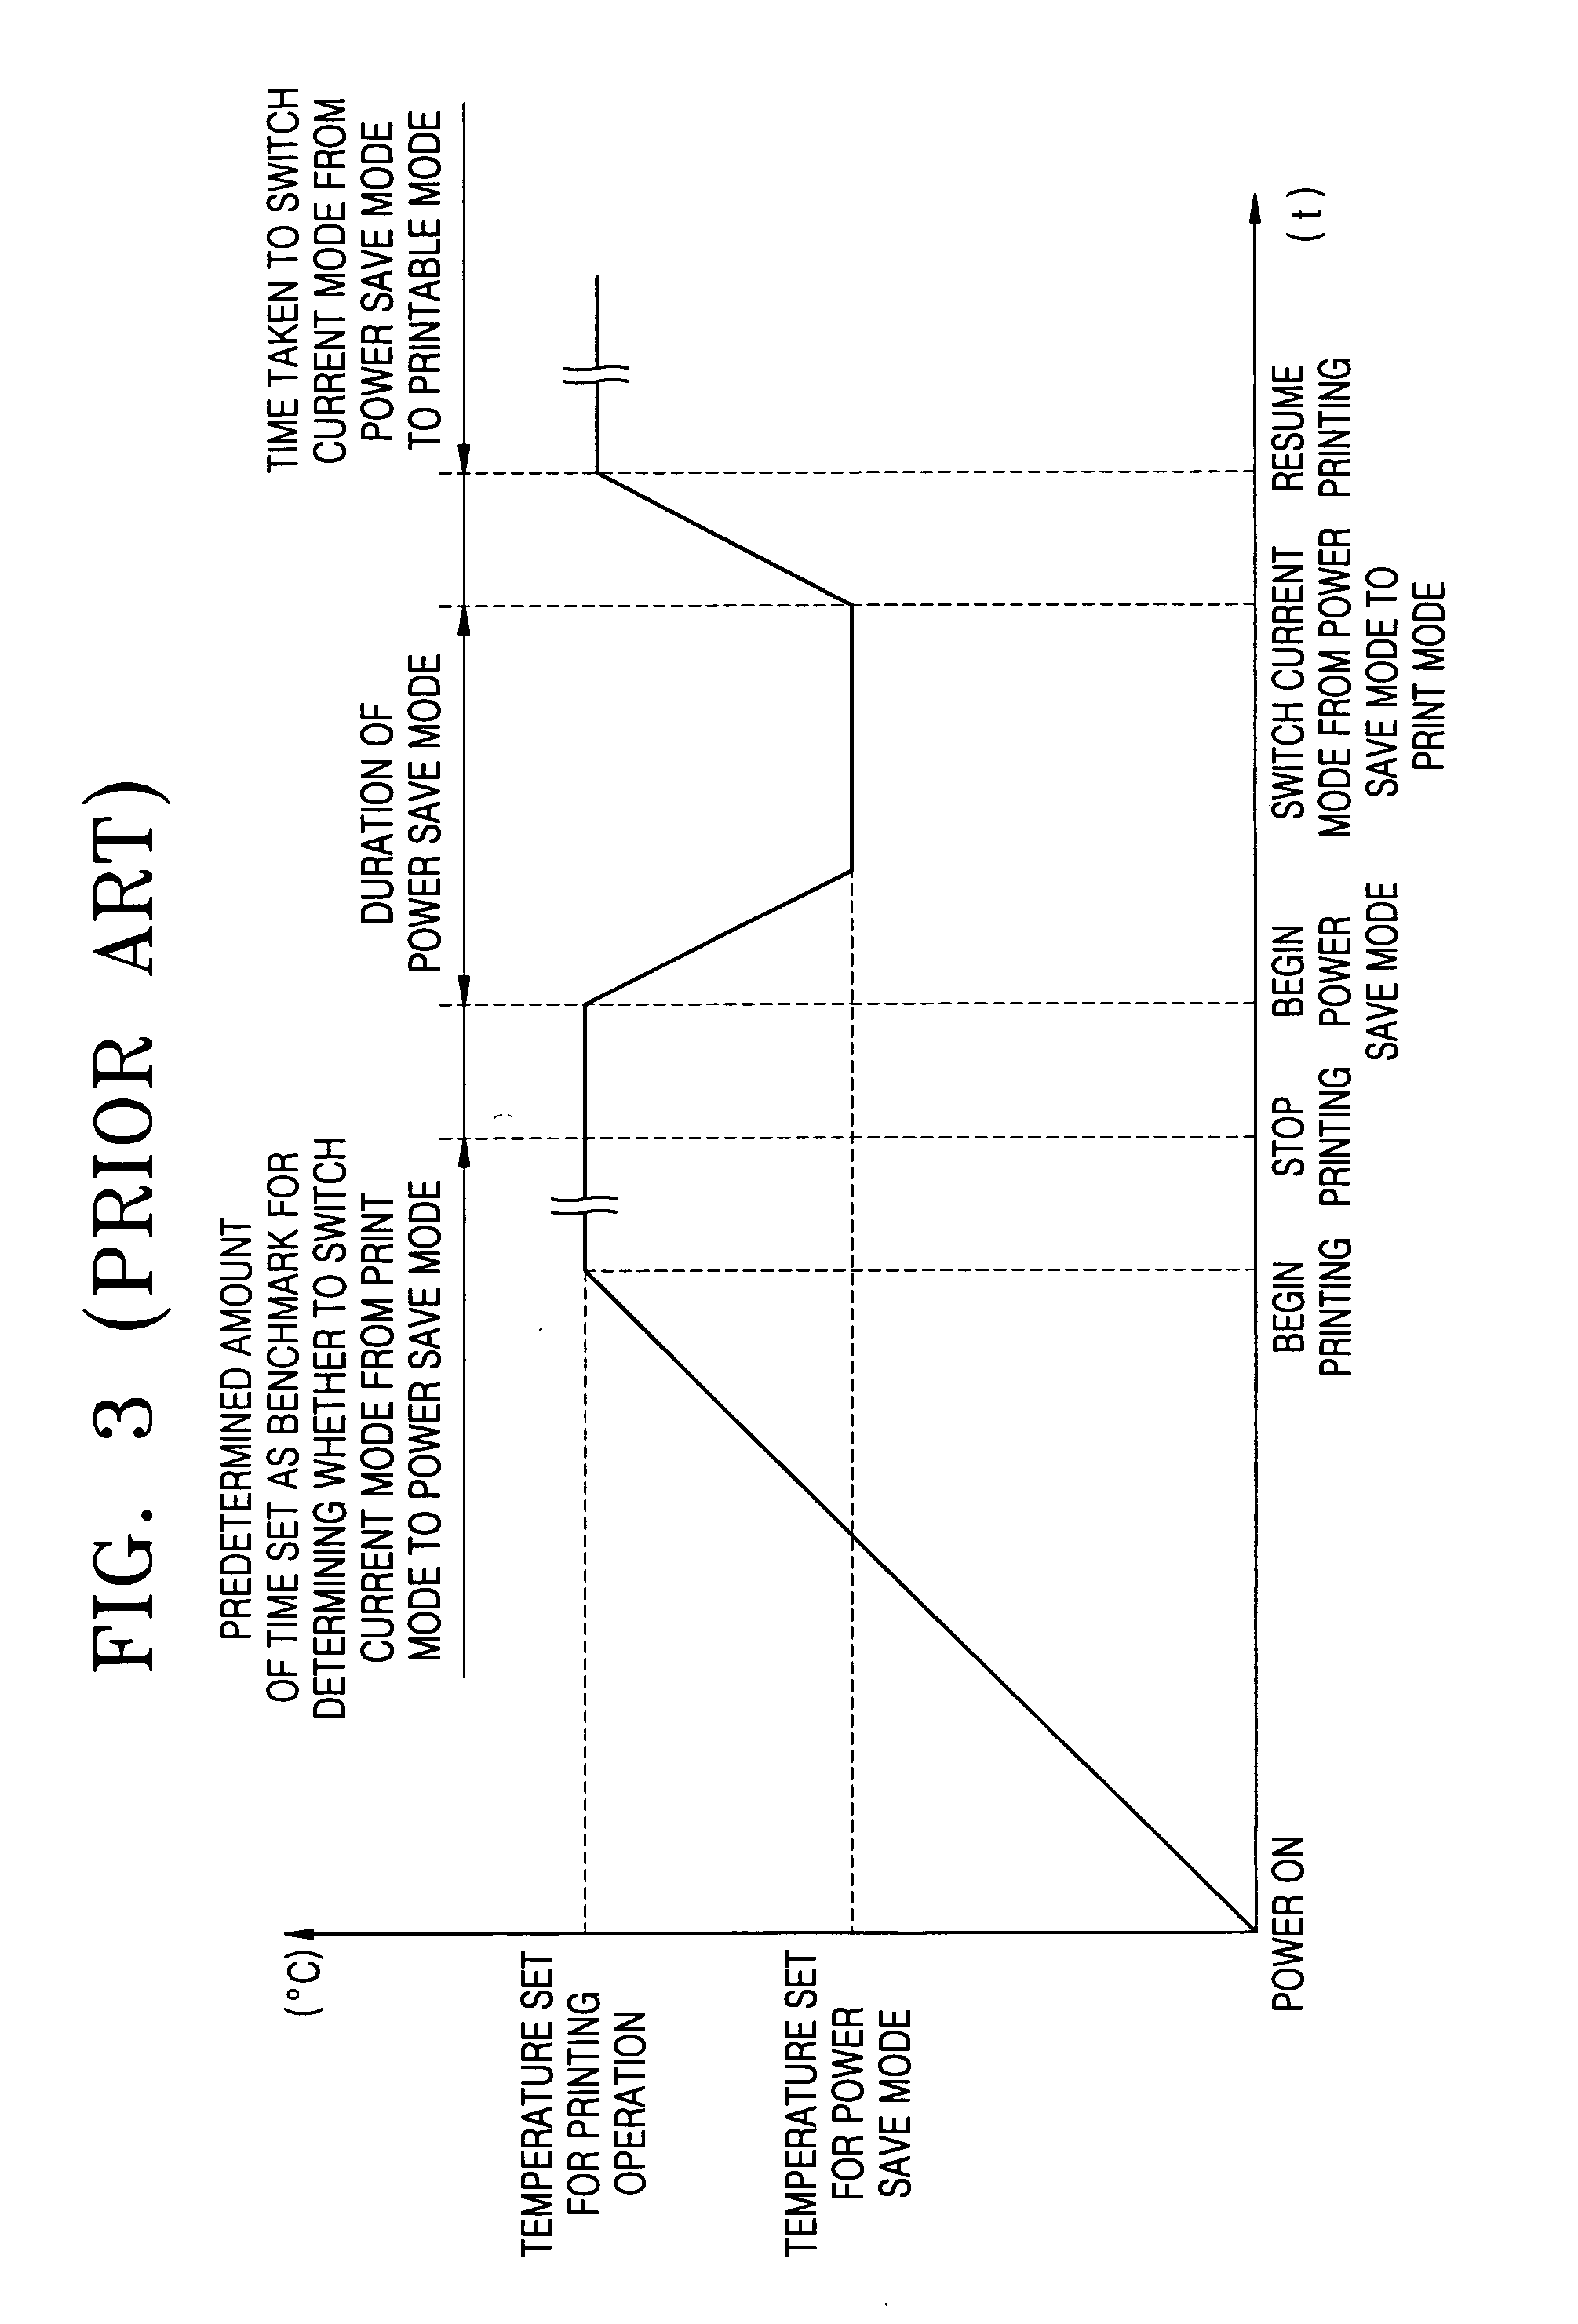 Apparatus and method for controlling power save mode of an electronic appliance